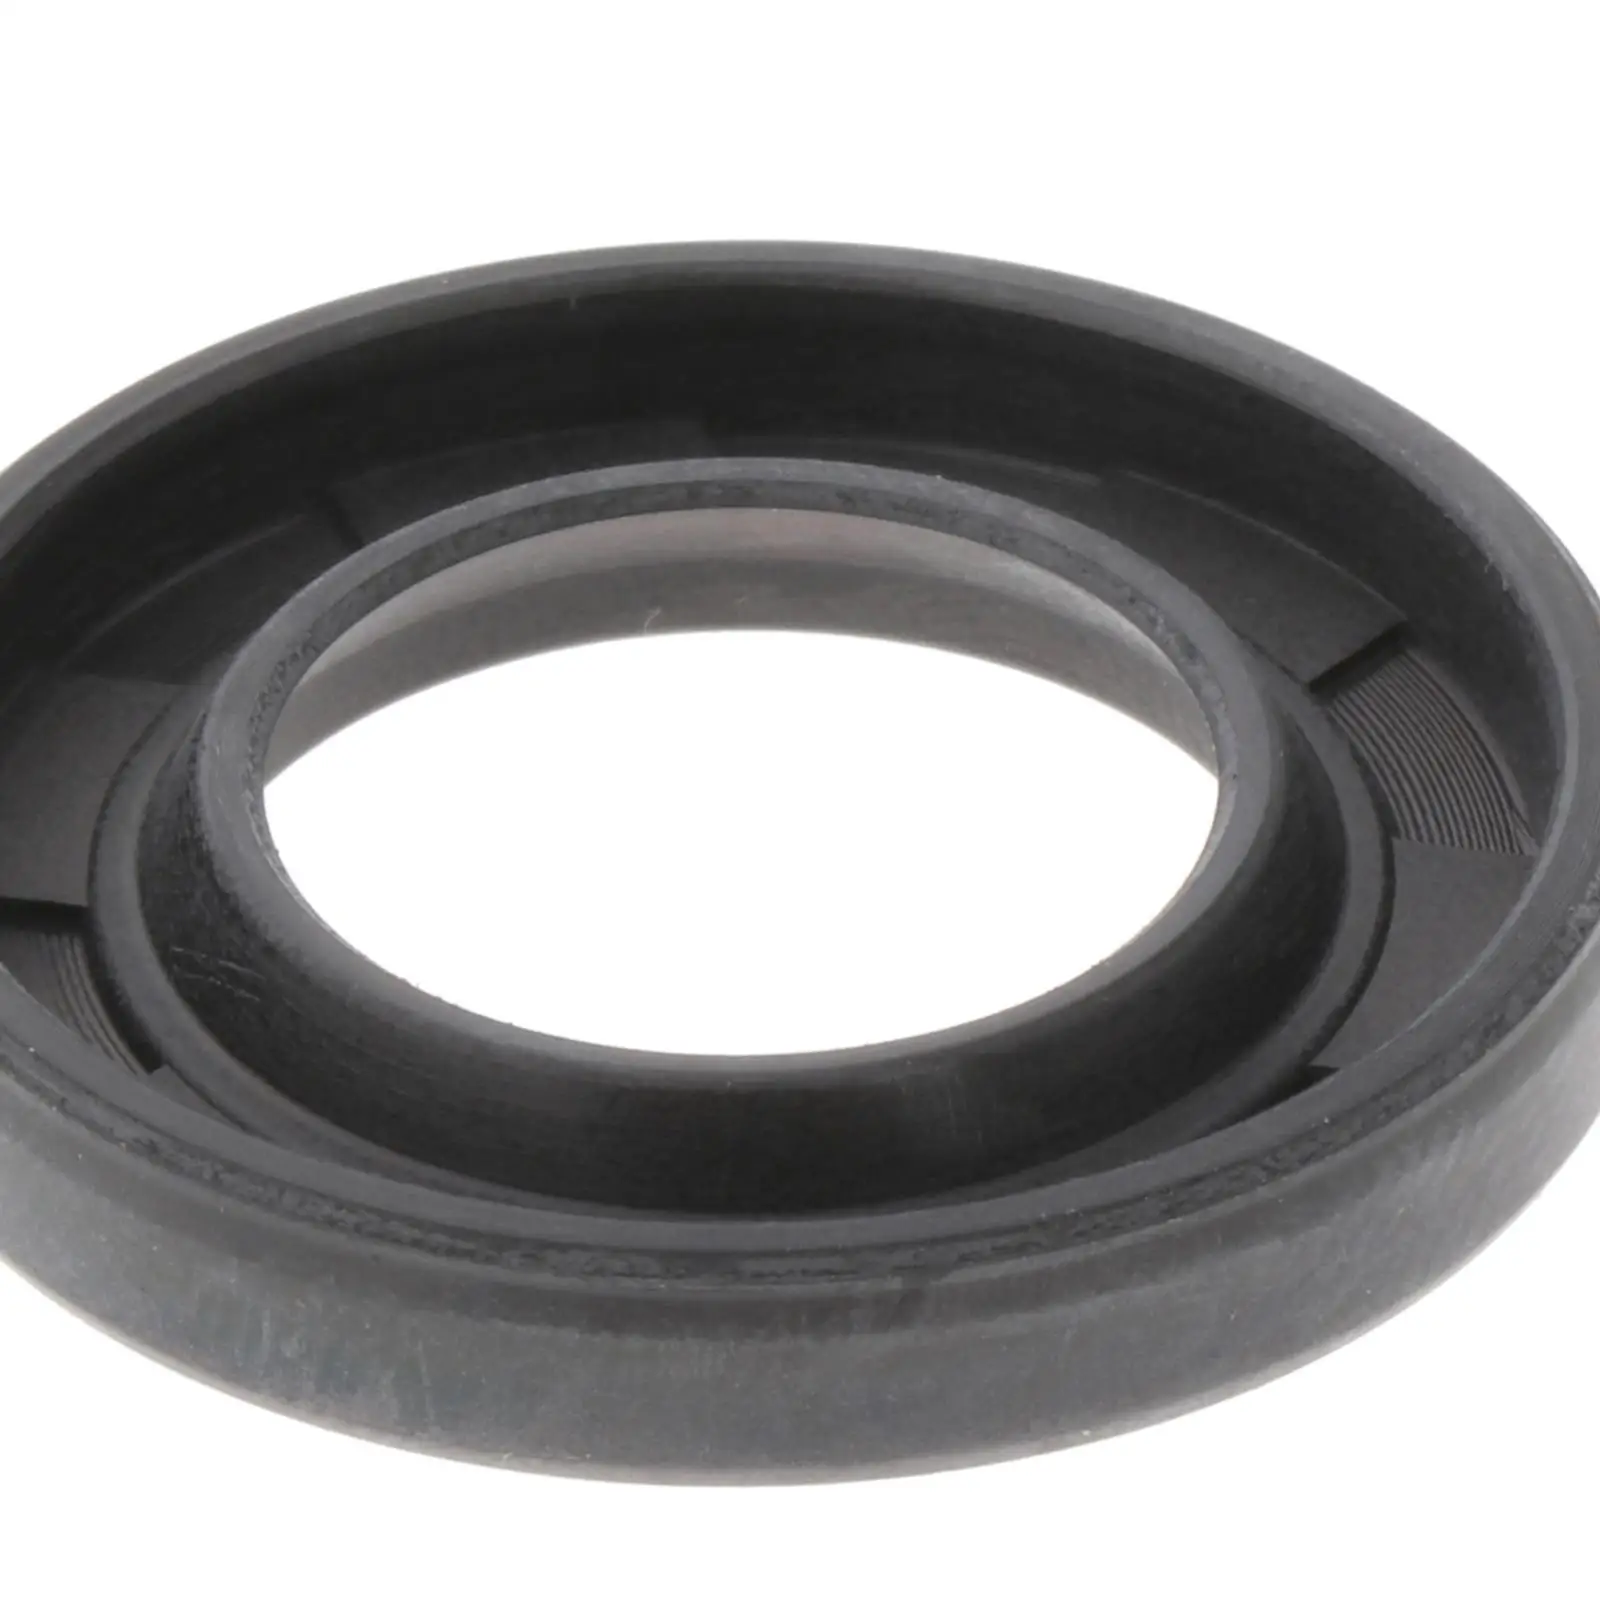 Boat Motor Oil Seal Replacement Fit for Yamaha Outboard 60HP 70HP 2T 3cyl